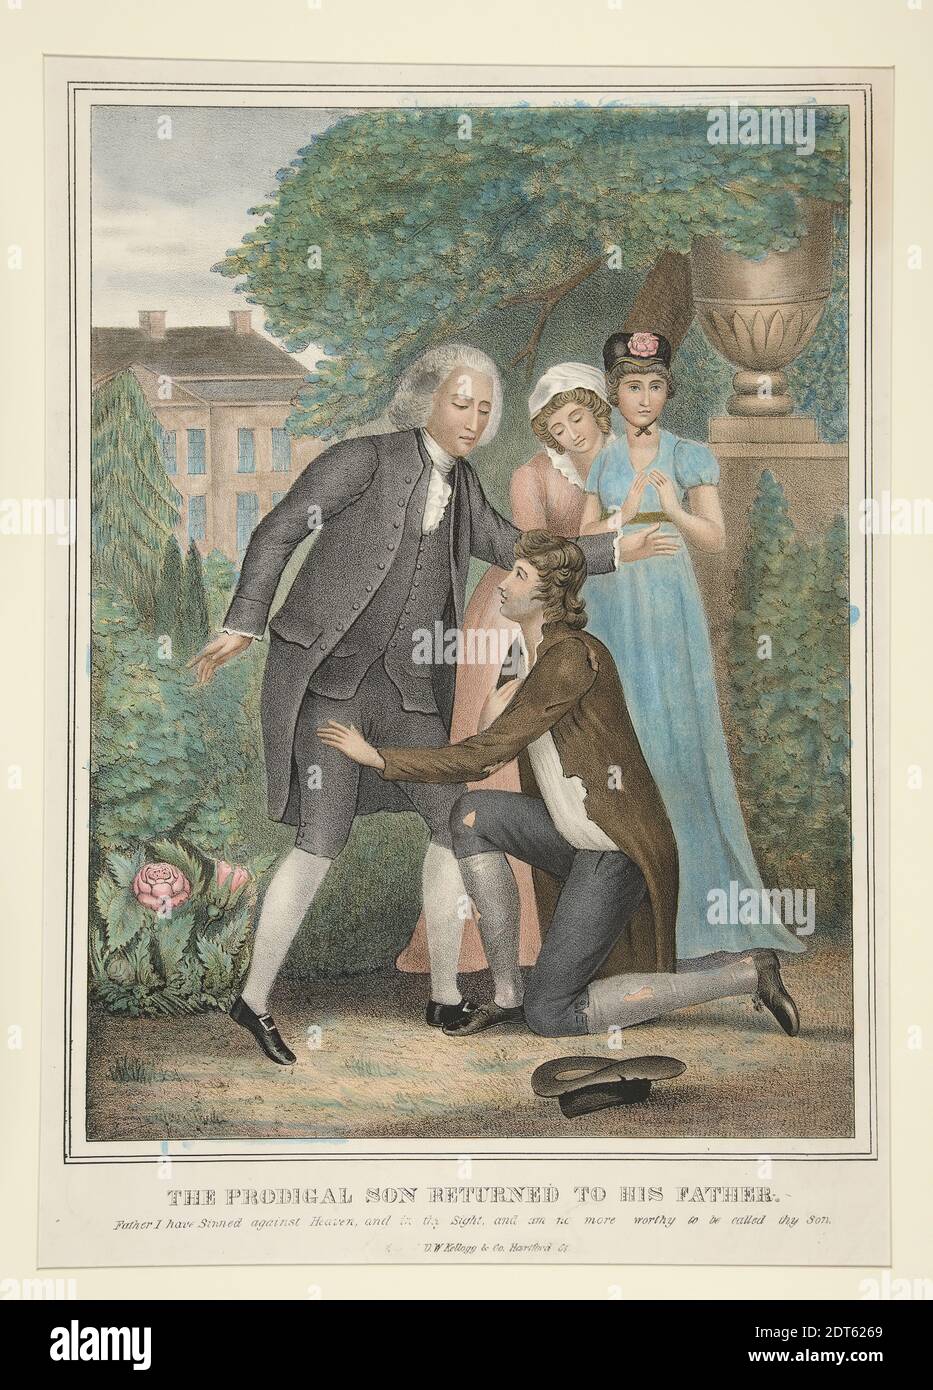 Artist: D. W. Kellogg &amp; Co., active Hartford, Conn., 1830–1840, The Prodigal Son Returned to His Father, Lithograph, sheet: 46.5 × 34 cm (18 5/16 × 13 3/8 in.), Made in United States, American, 19th century, Works on Paper - Prints Stock Photo